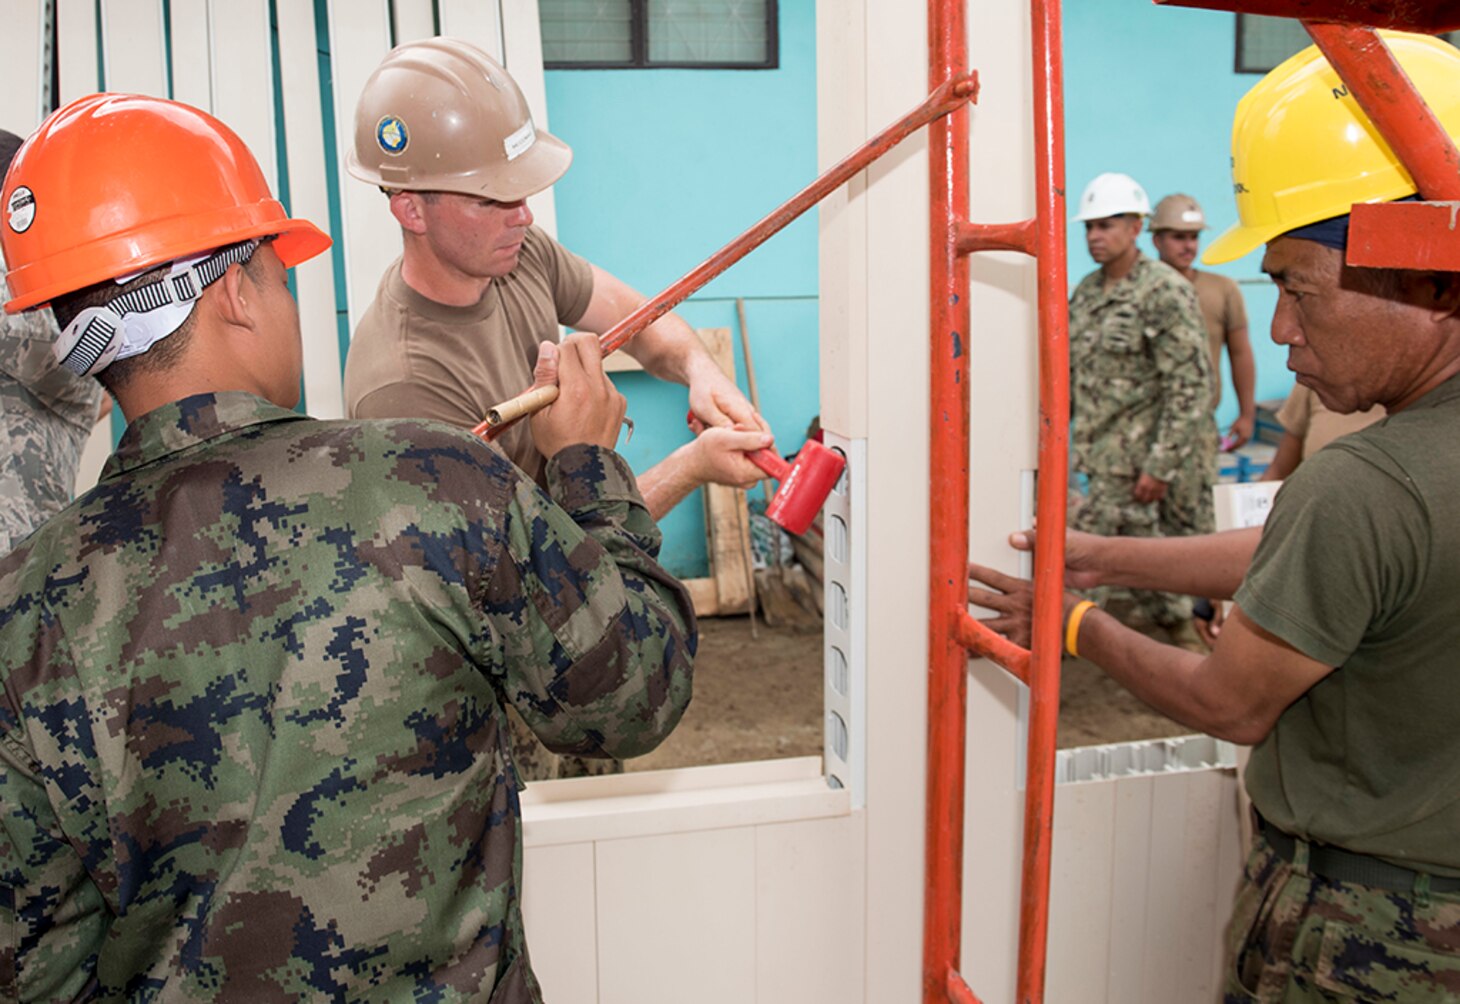 SATTAHIP, Thailand (June 21, 2016) Equipment Operator Constructionman Daniel McComas from Naval Mobile Construction Battalion (NMCB) 4 hammers construction pieces into place with Royal Thai Navy Seabees while building a library at Khao Chi Chan School during Cooperation Afloat Readiness and Training (CARAT) Thailand 2016. CARAT is a series of annual maritime exercises between the U.S. Navy, U.S. Marine Corps and the armed forces of nine partner nations to include Bangladesh, Brunei, Cambodia, Indonesia, Malaysia, the Philippines, Singapore, Thailand, and Timor-Leste. 